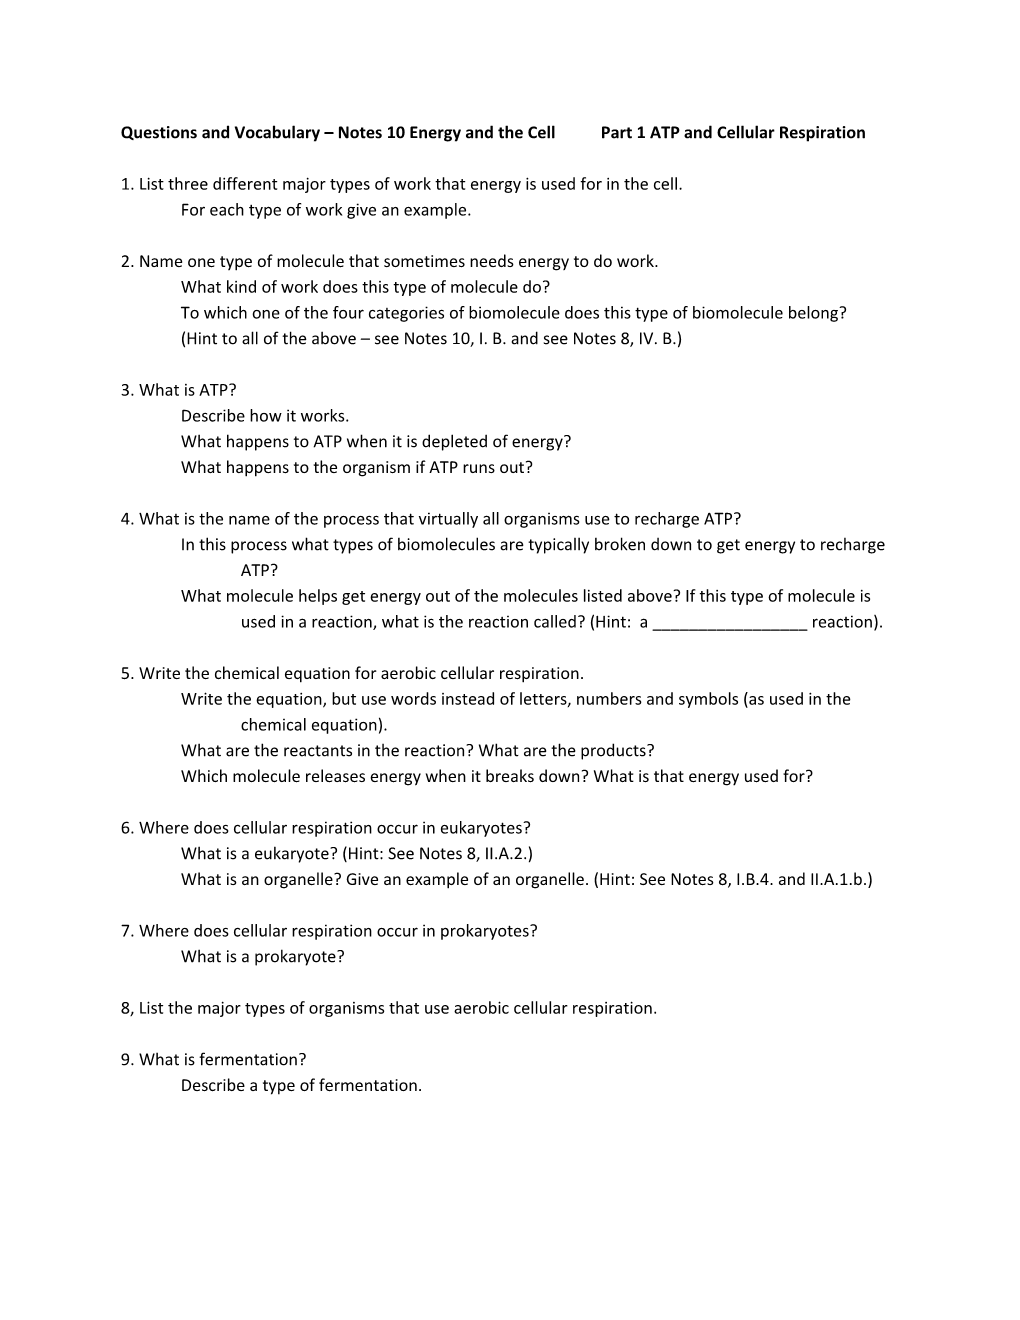 Questions and Vocabulary Notes 10 Energy and the Cellpart 1 ATP and Cellular Respiration